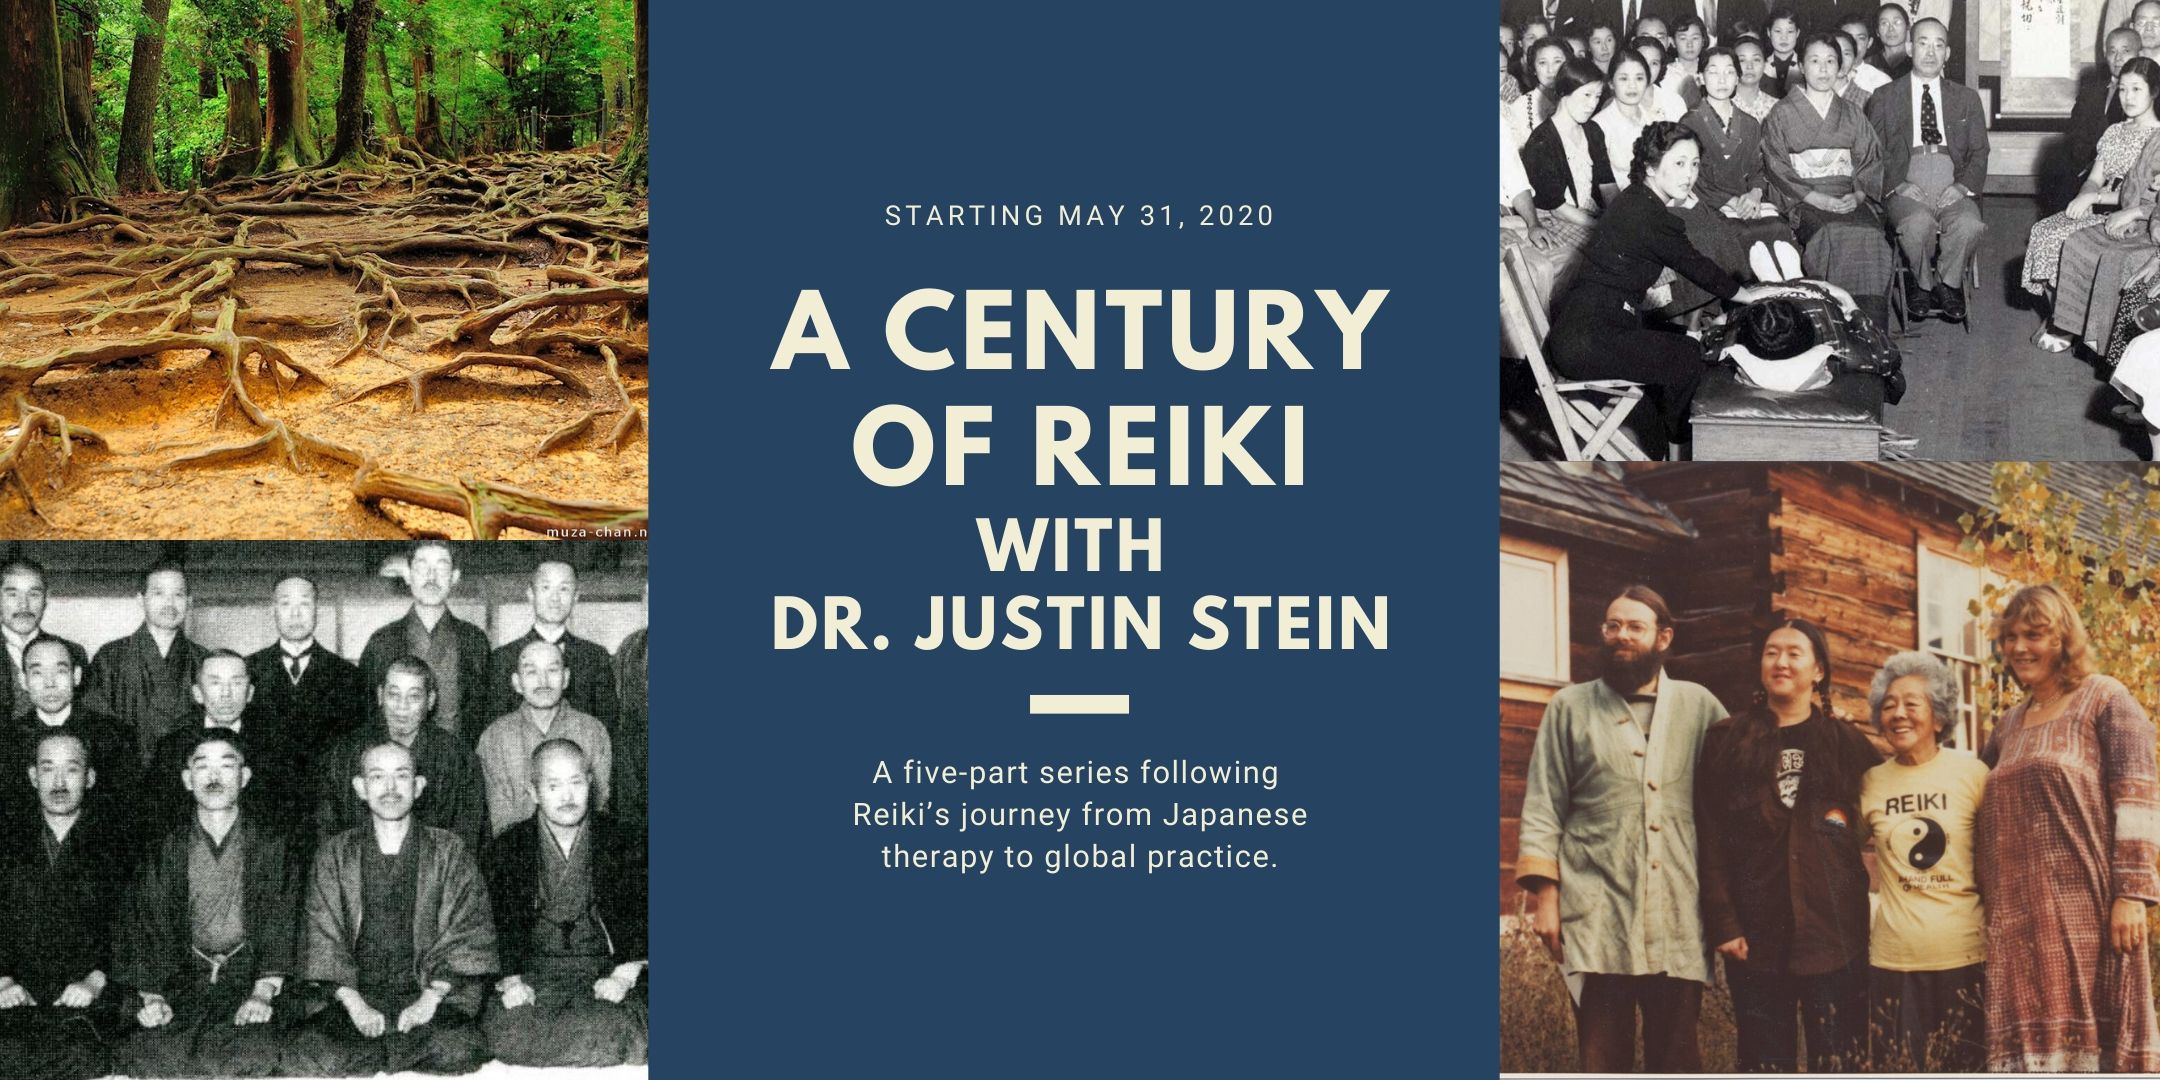 A Century of Reiki with Dr. Justin Stein